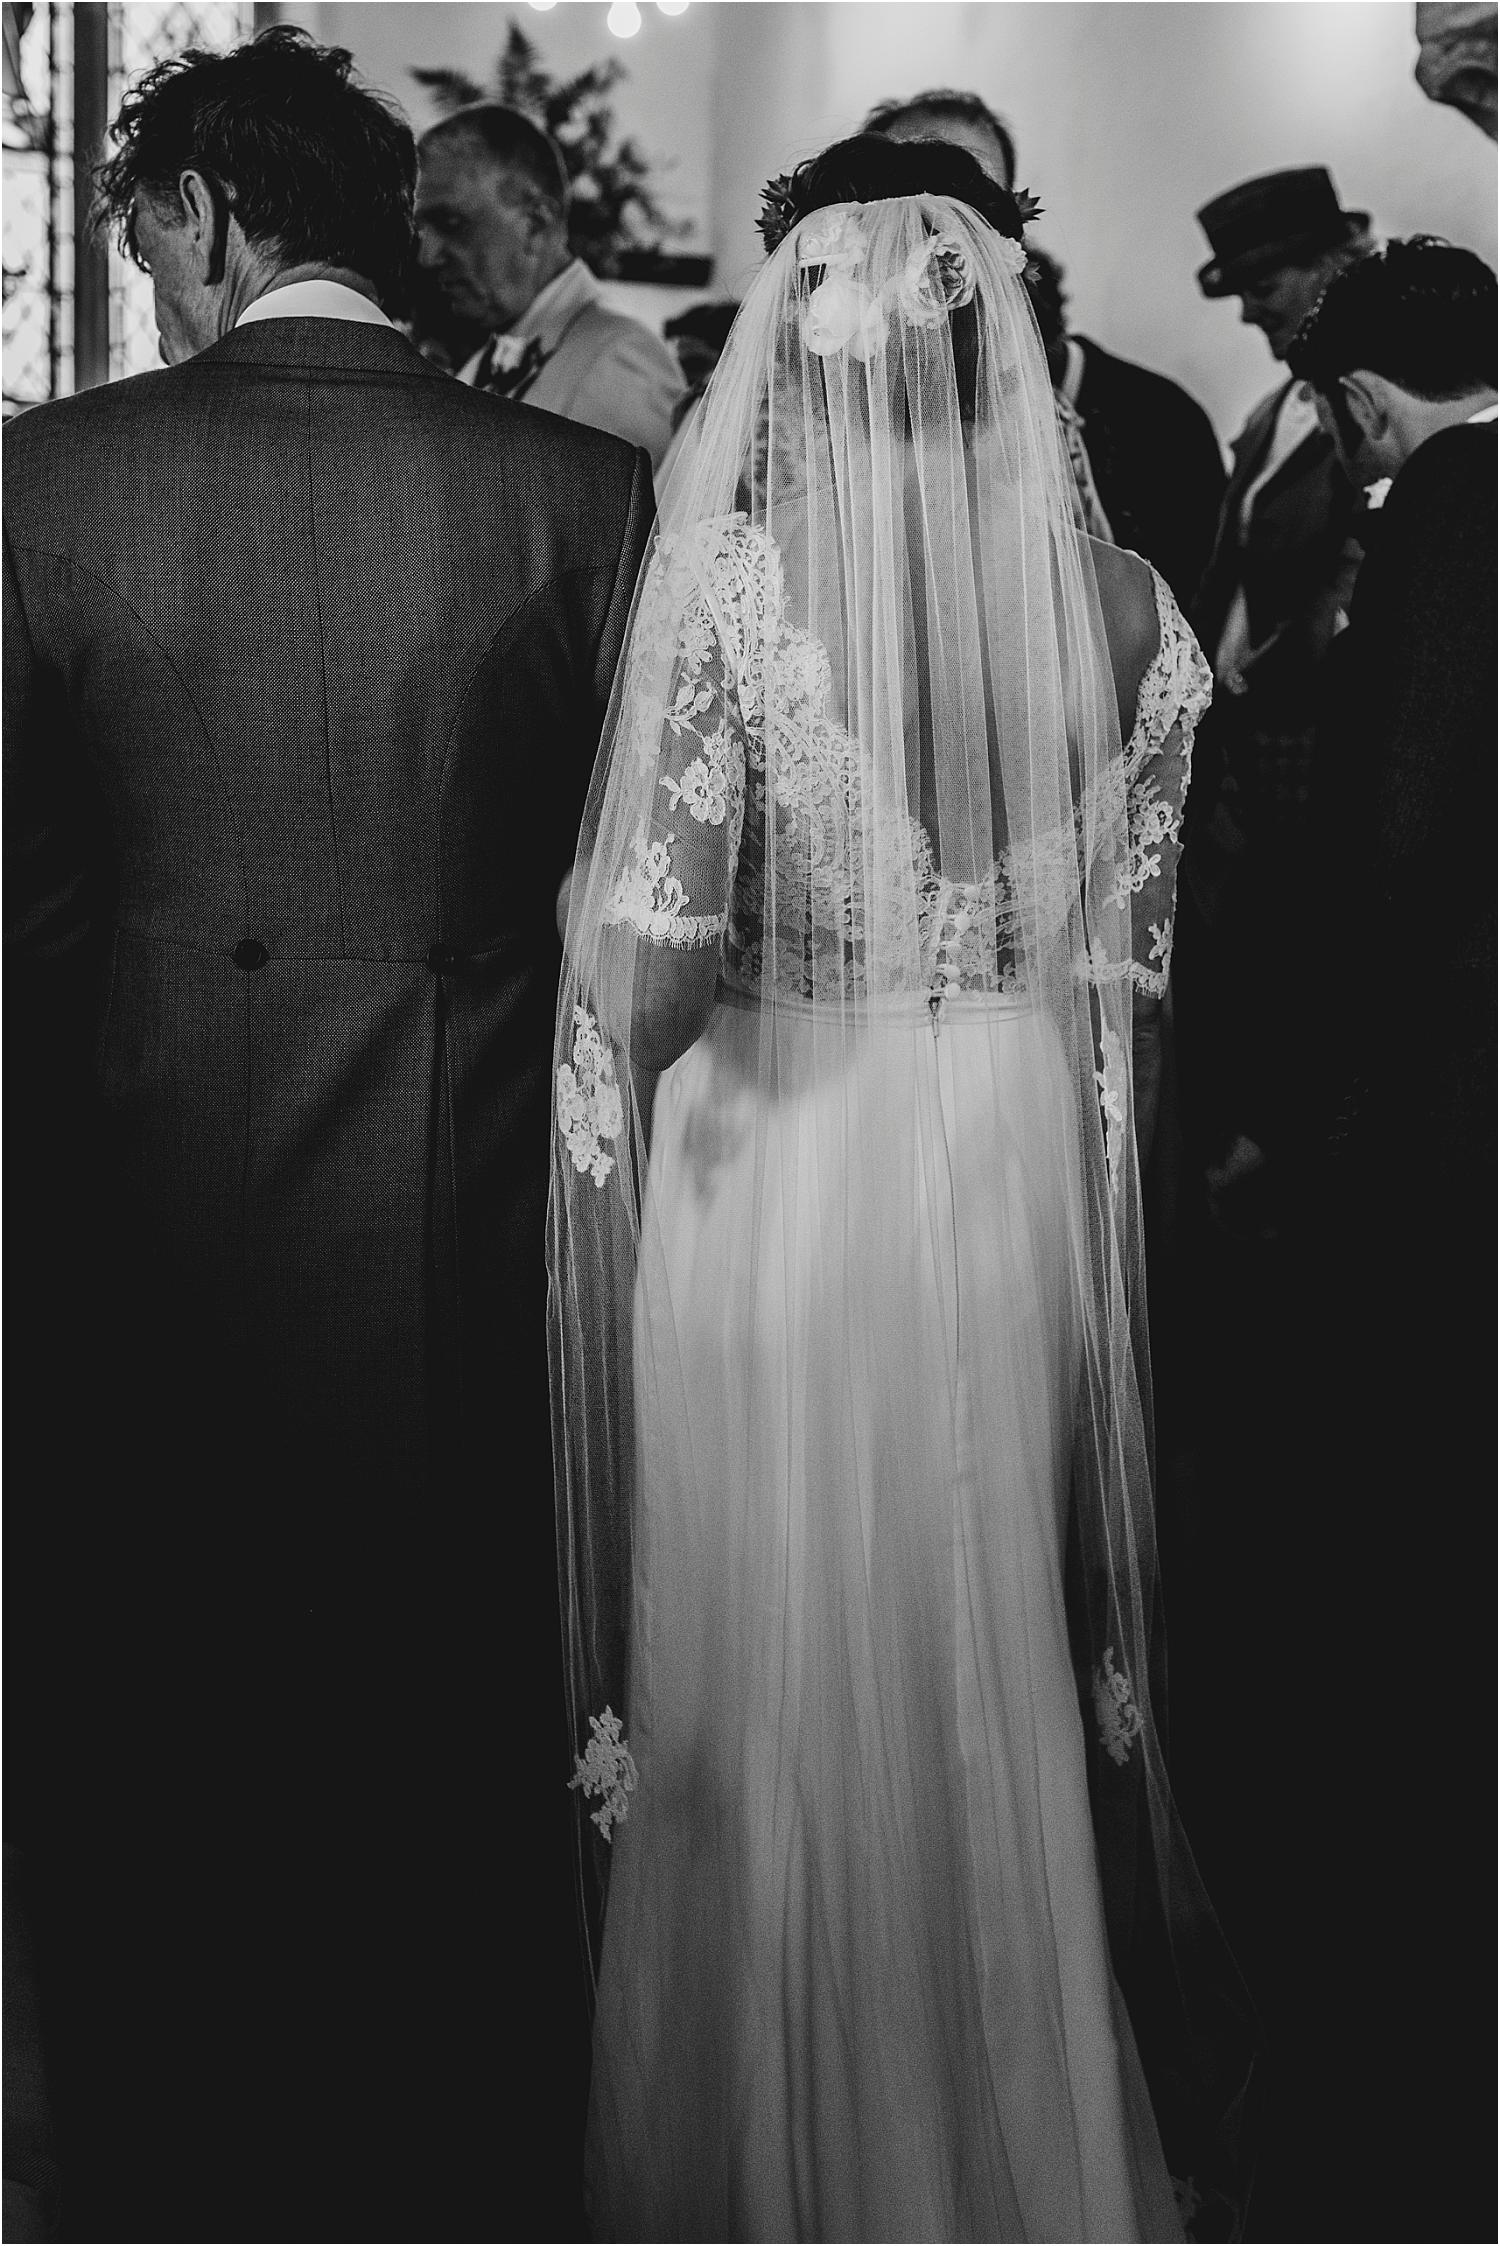 veil and wedding dress by Louise Selby